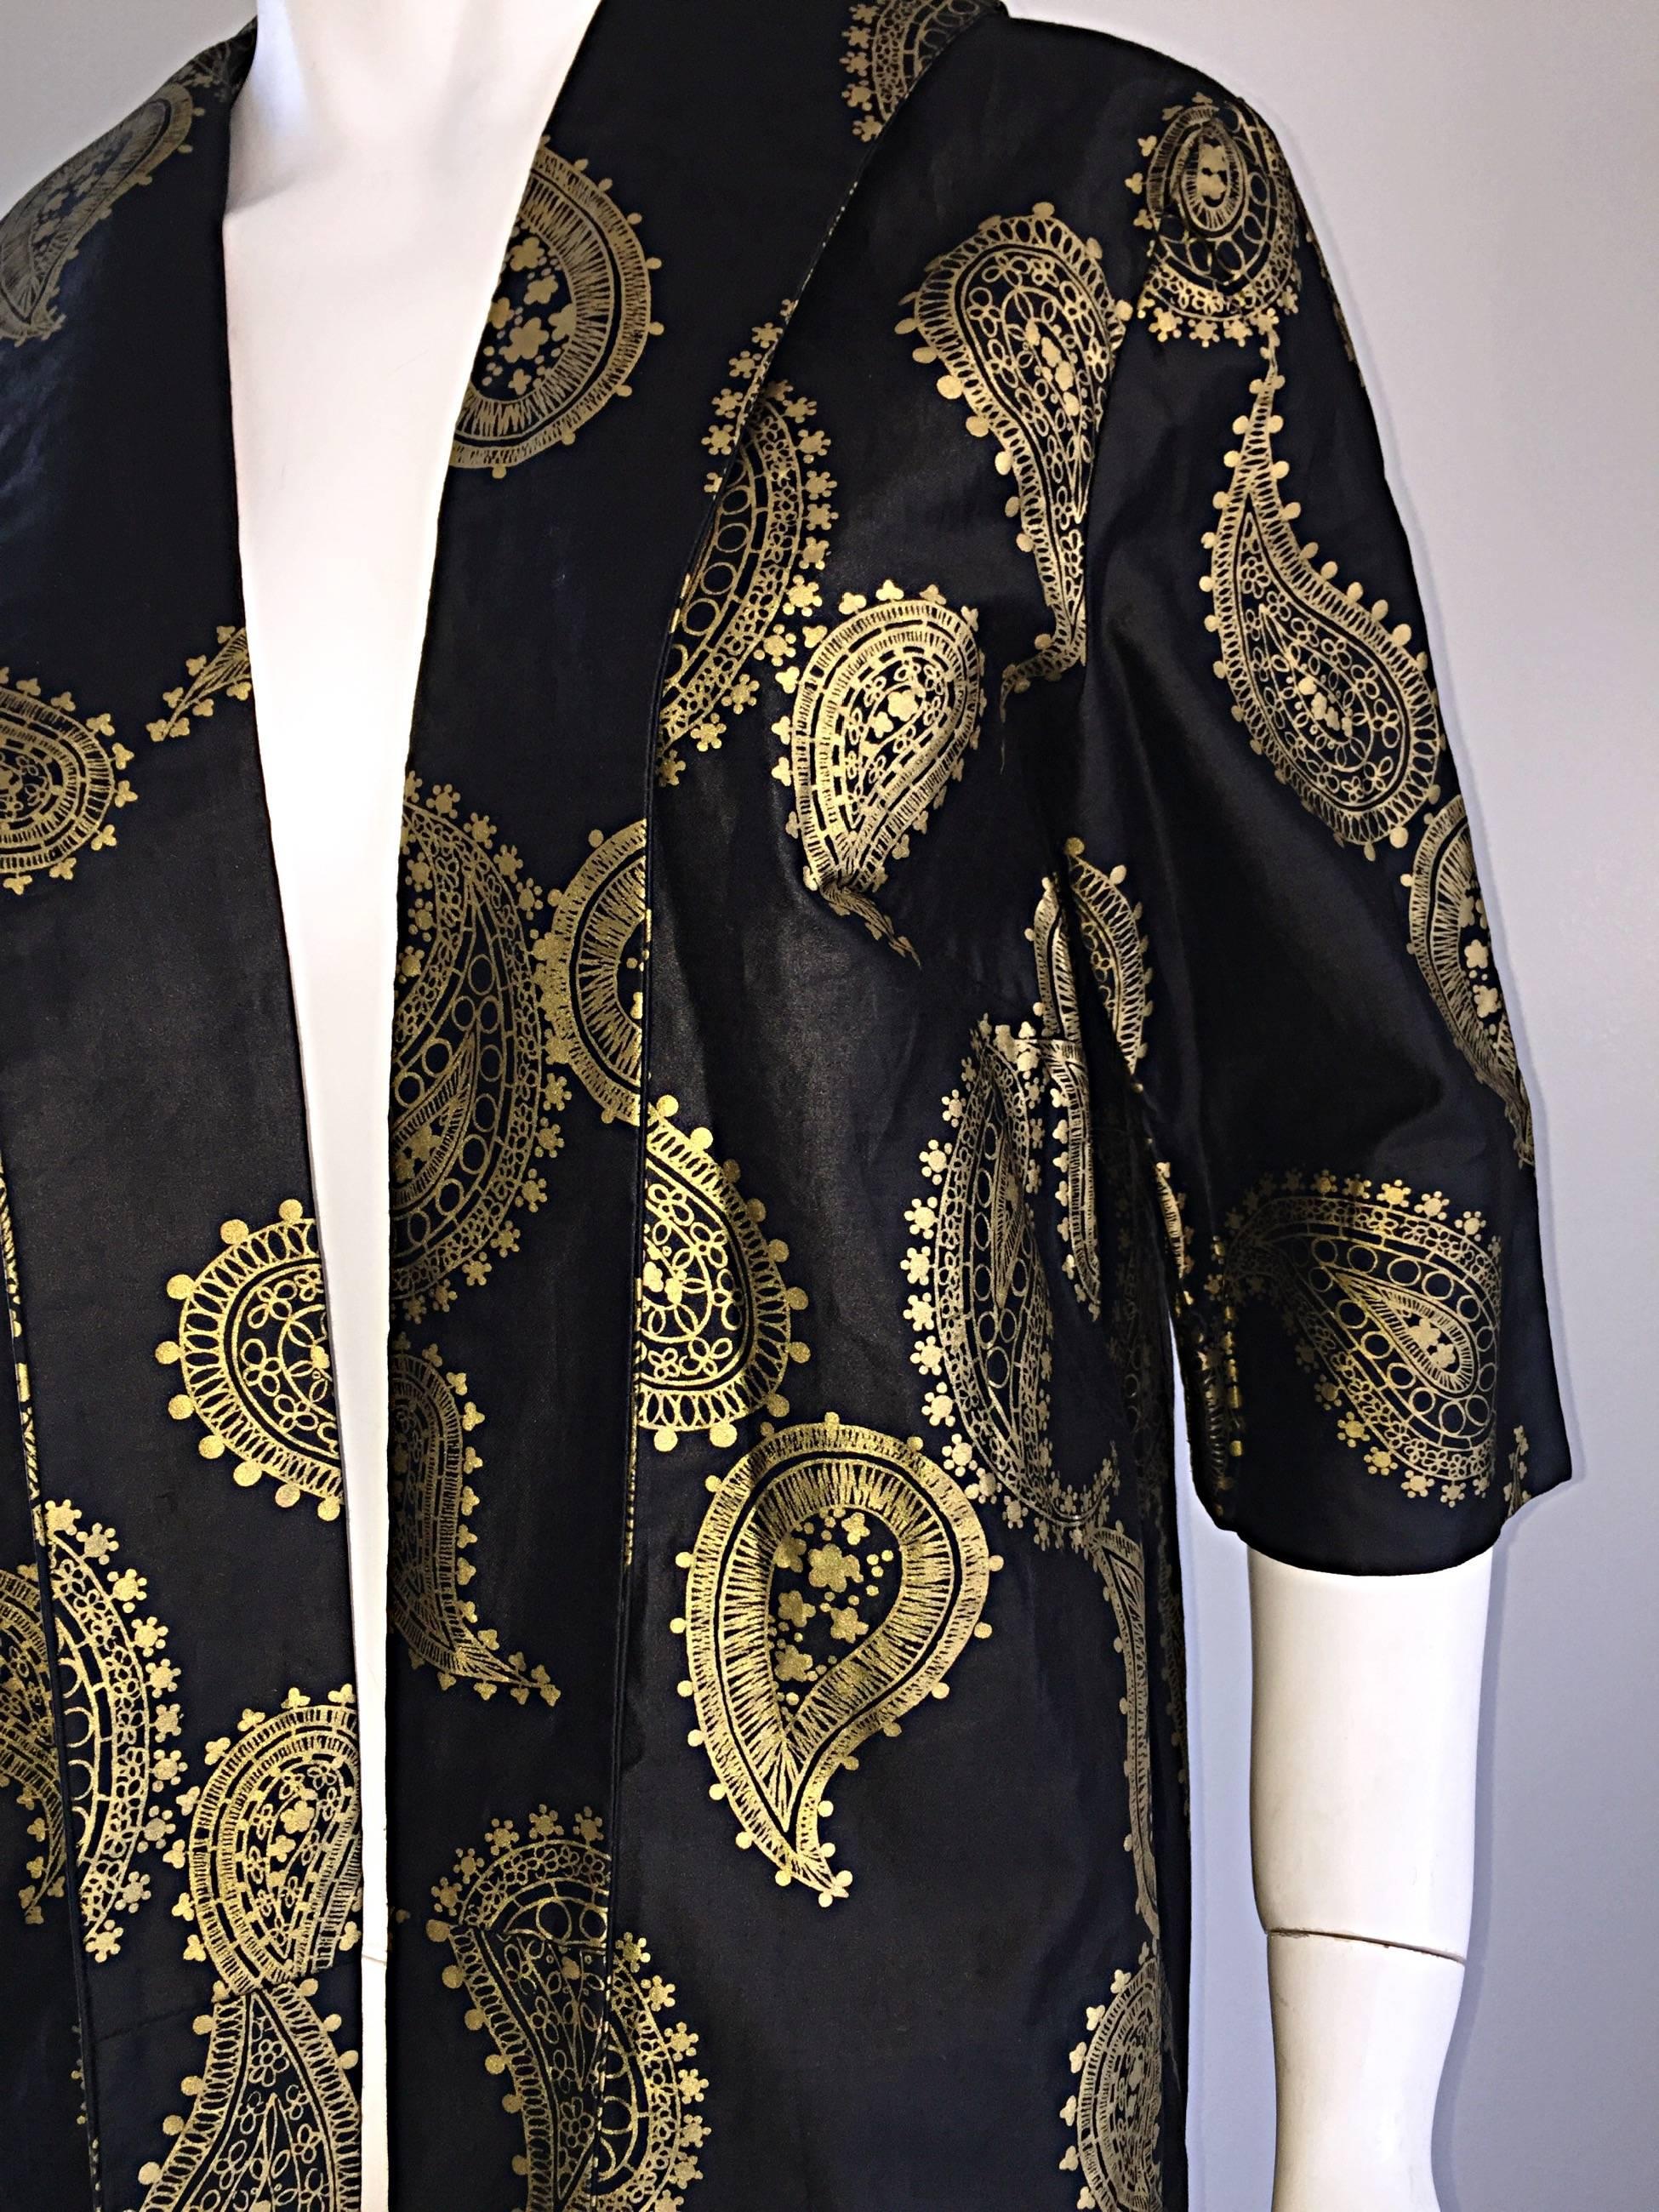 Rare 1950s Alfred Shaheen Vintage 50s Black And Gold Hand Printed Kimono Jacket 1